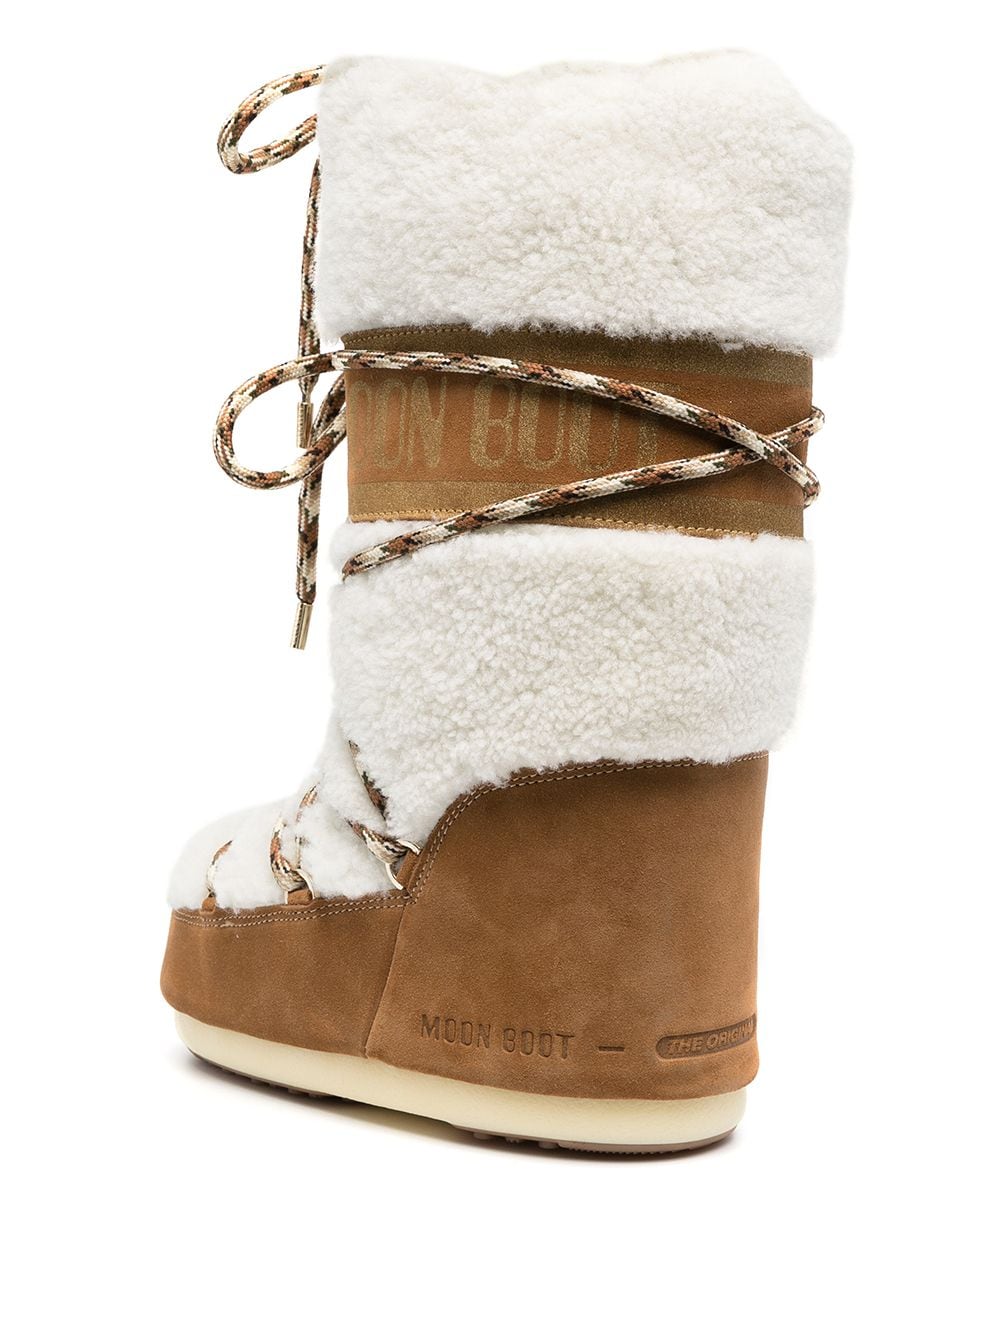 MOON BOOT WOMEN LAB69 Icon Shearling Snow Boots Whisky/White - MAISONDEFASHION.COM